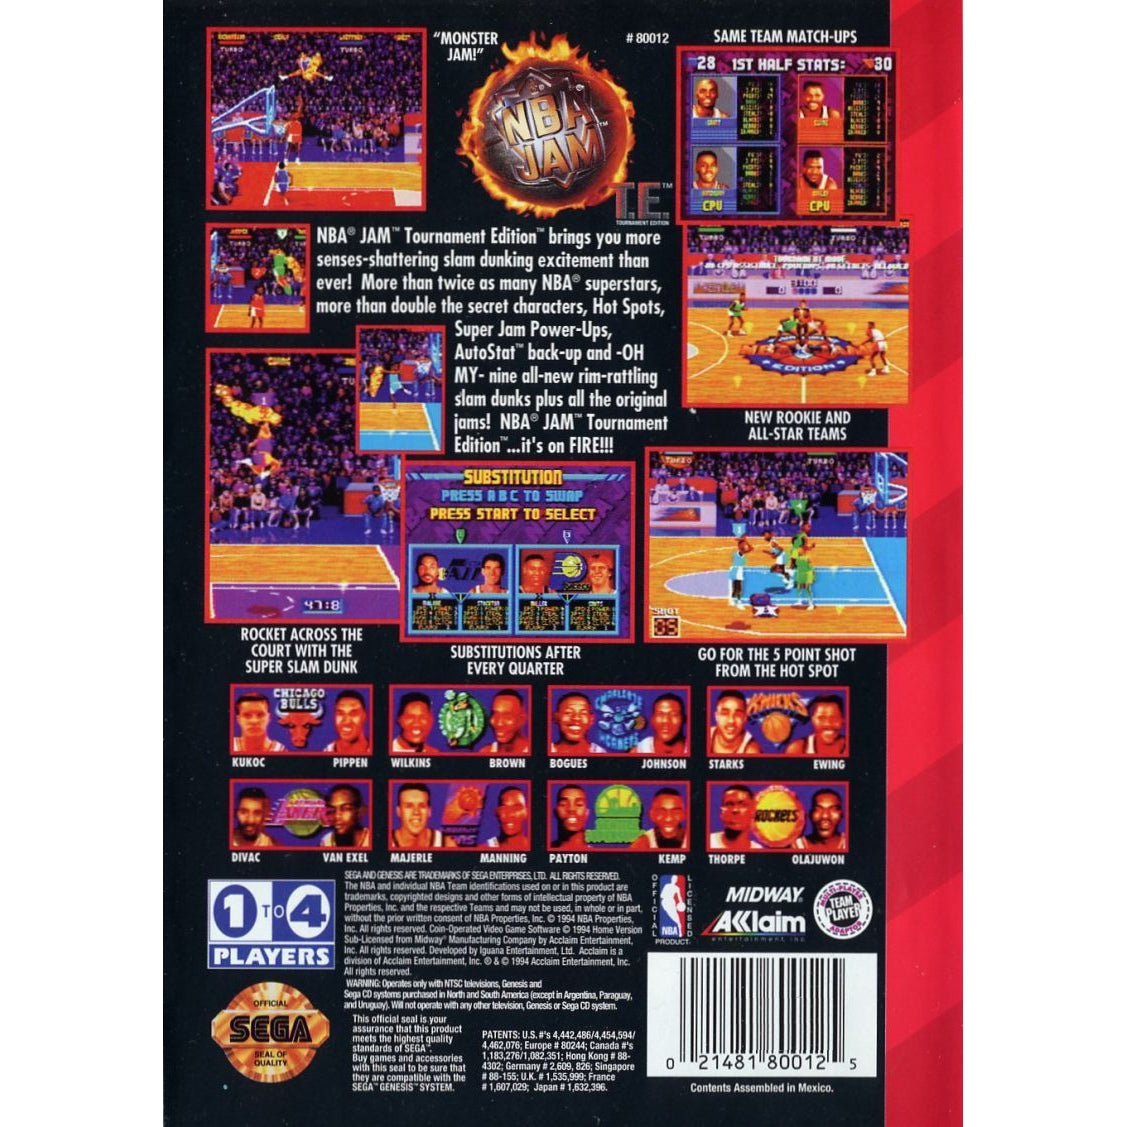 NBA Jam: Tournament Edition - Sega Genesis Game Complete - YourGamingShop.com - Buy, Sell, Trade Video Games Online. 120 Day Warranty. Satisfaction Guaranteed.